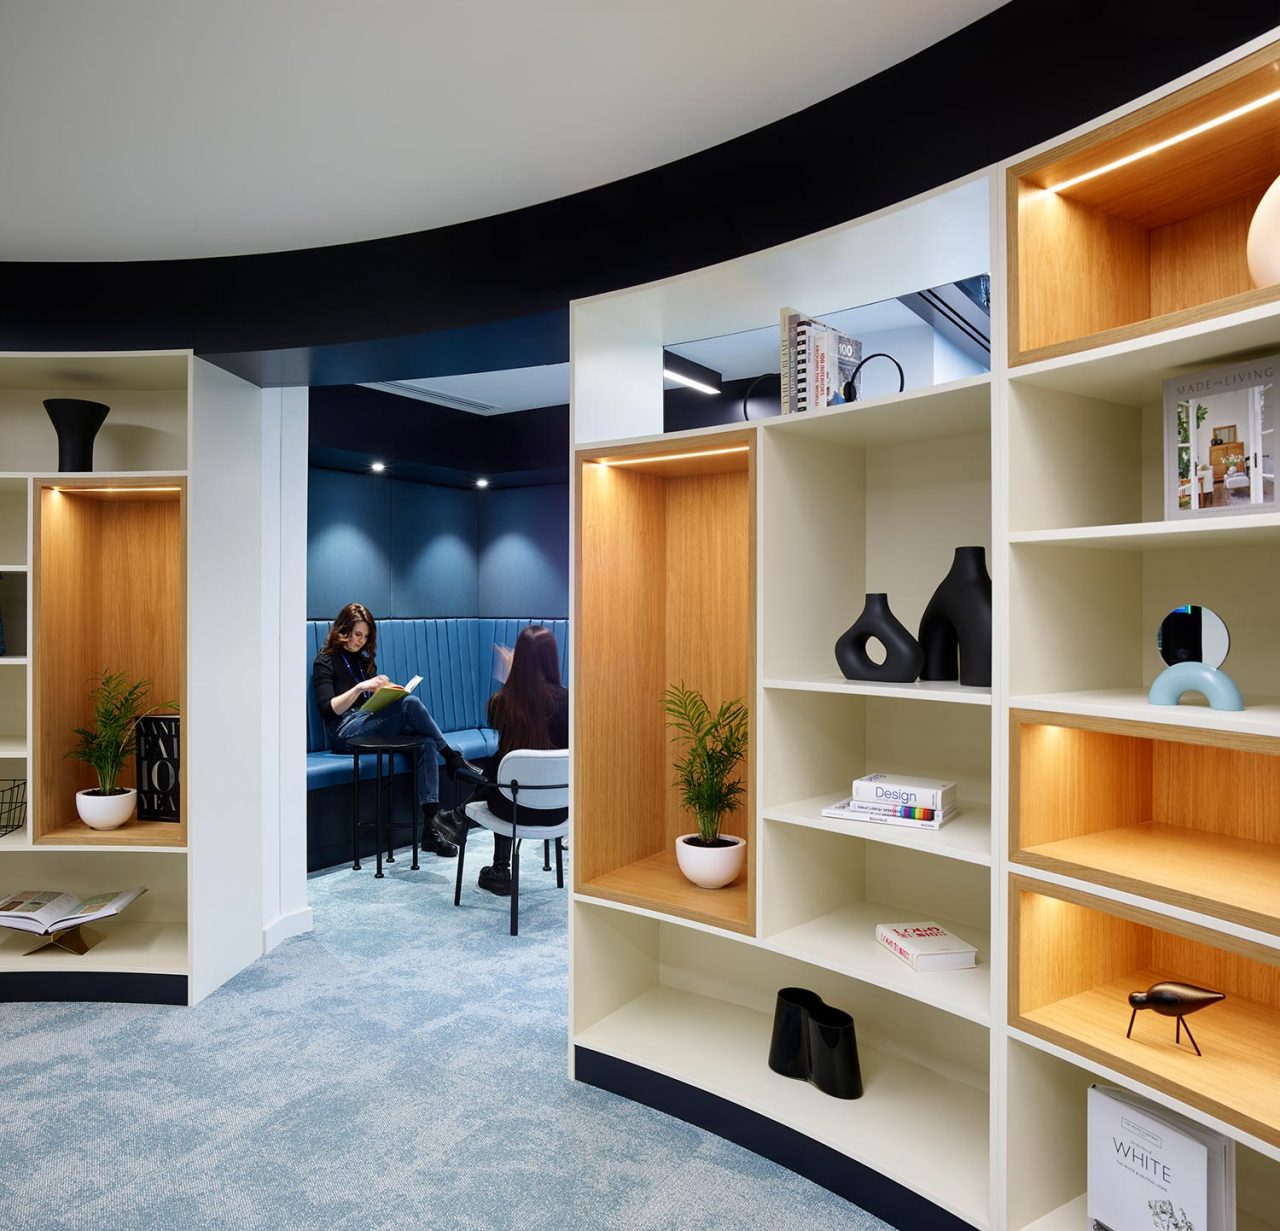 Shelving units with objets and planting then a nook space in blue with lounge furniture visible in the middle